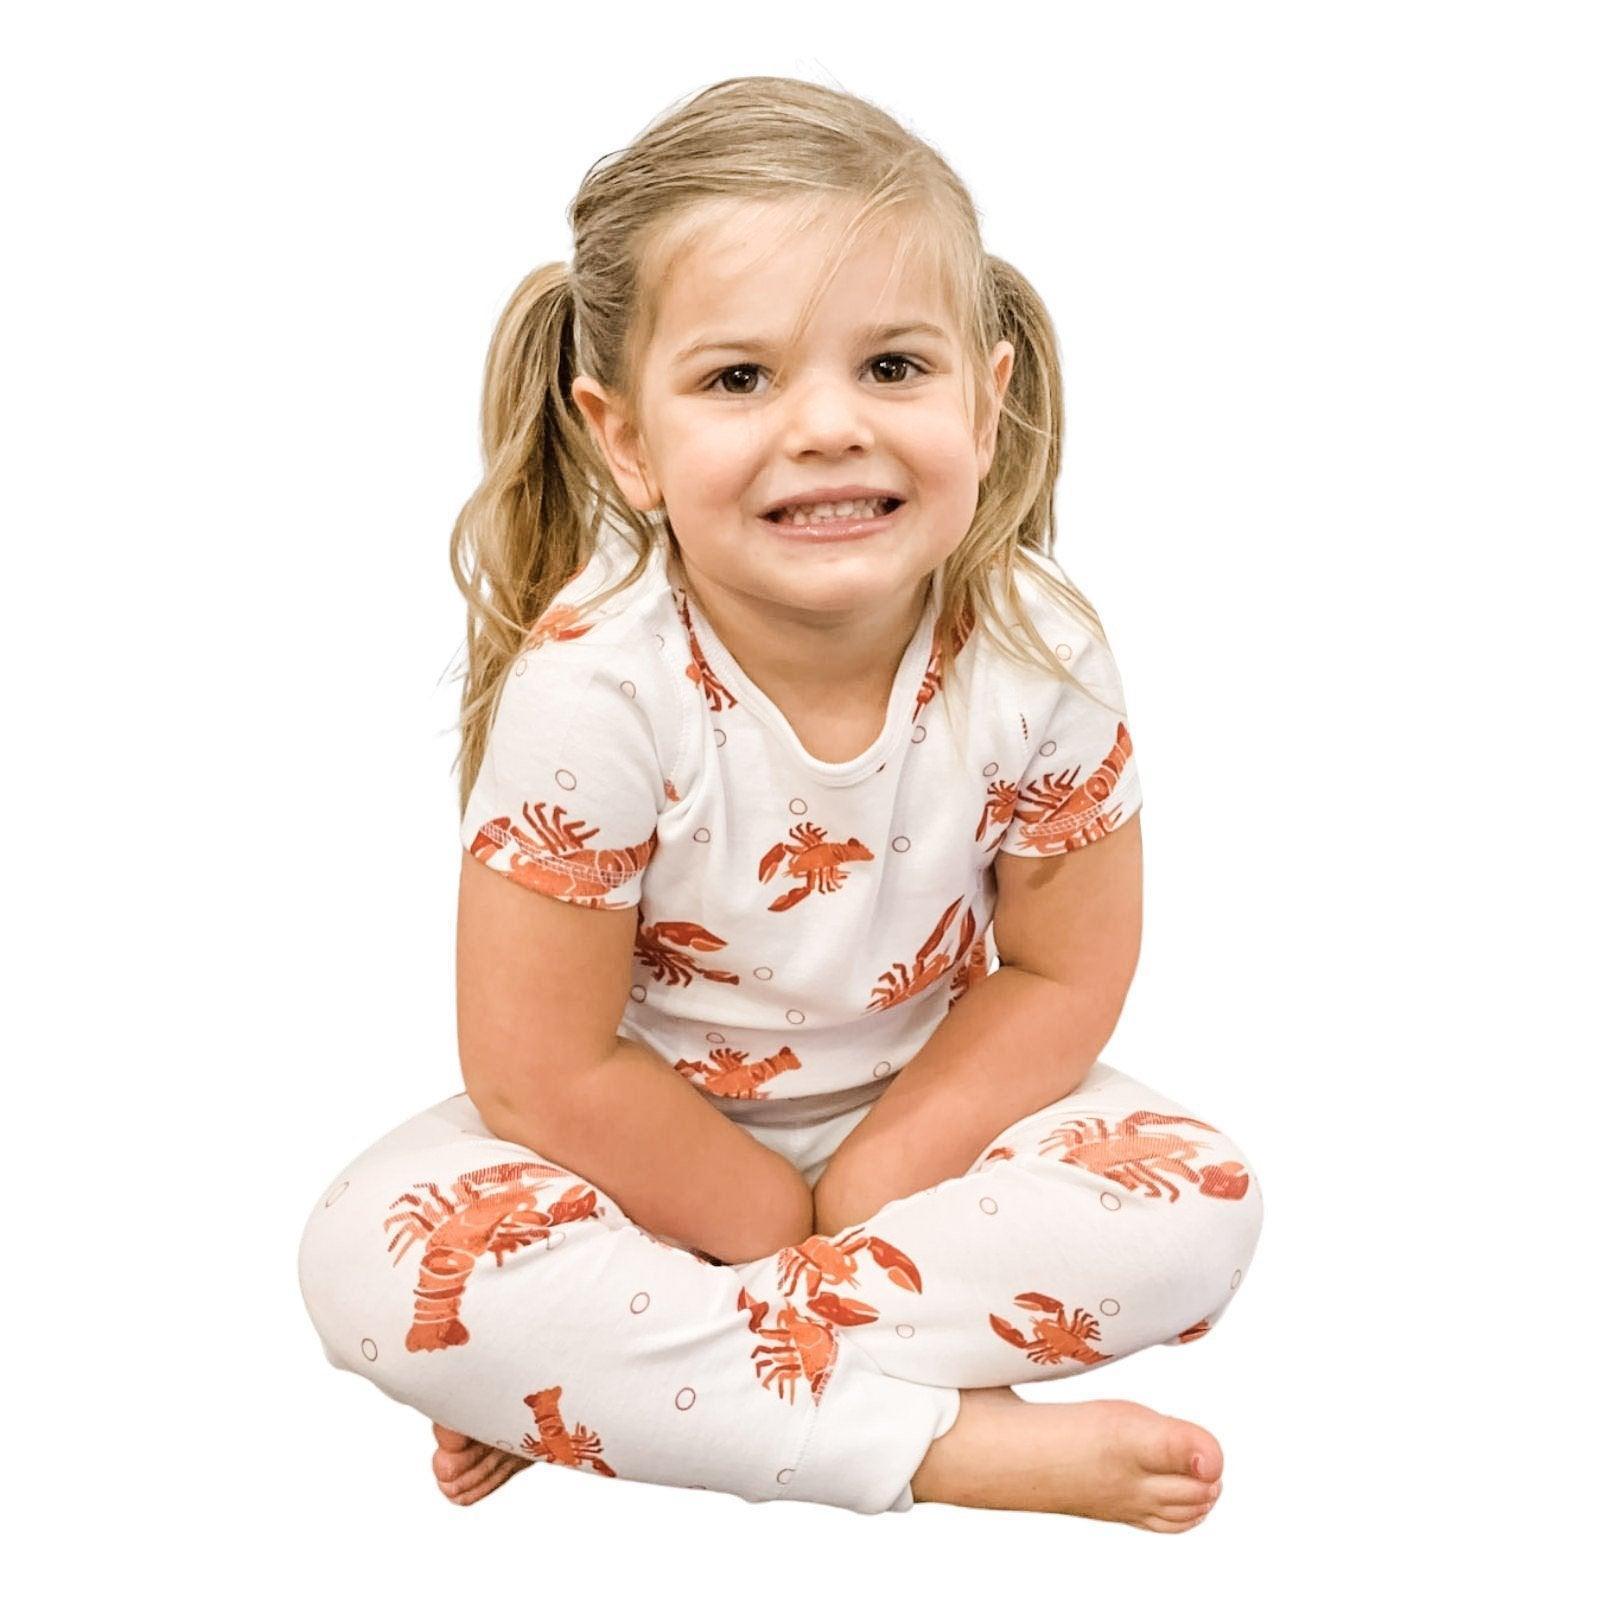 Toddler wearing white pajamas with red lobsters and blue crawfish, smiling and sitting on a white bed.